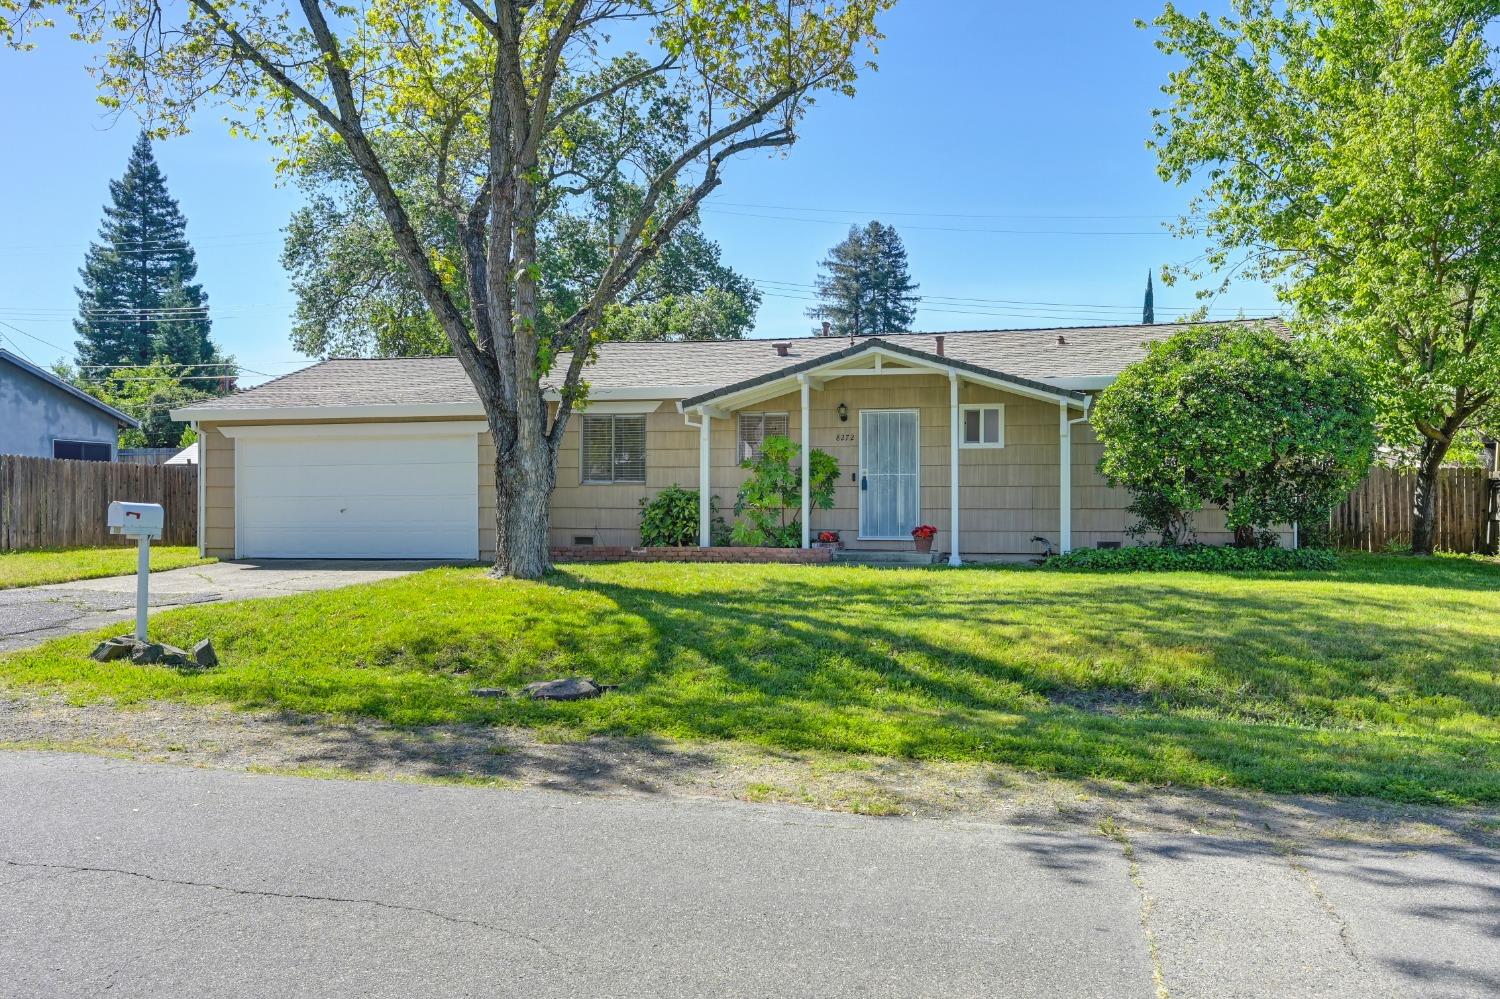 Welcome to this cozy 3-bedroom, 1-bathroom home in Fair Oaks, freshly painted both inside and out. L